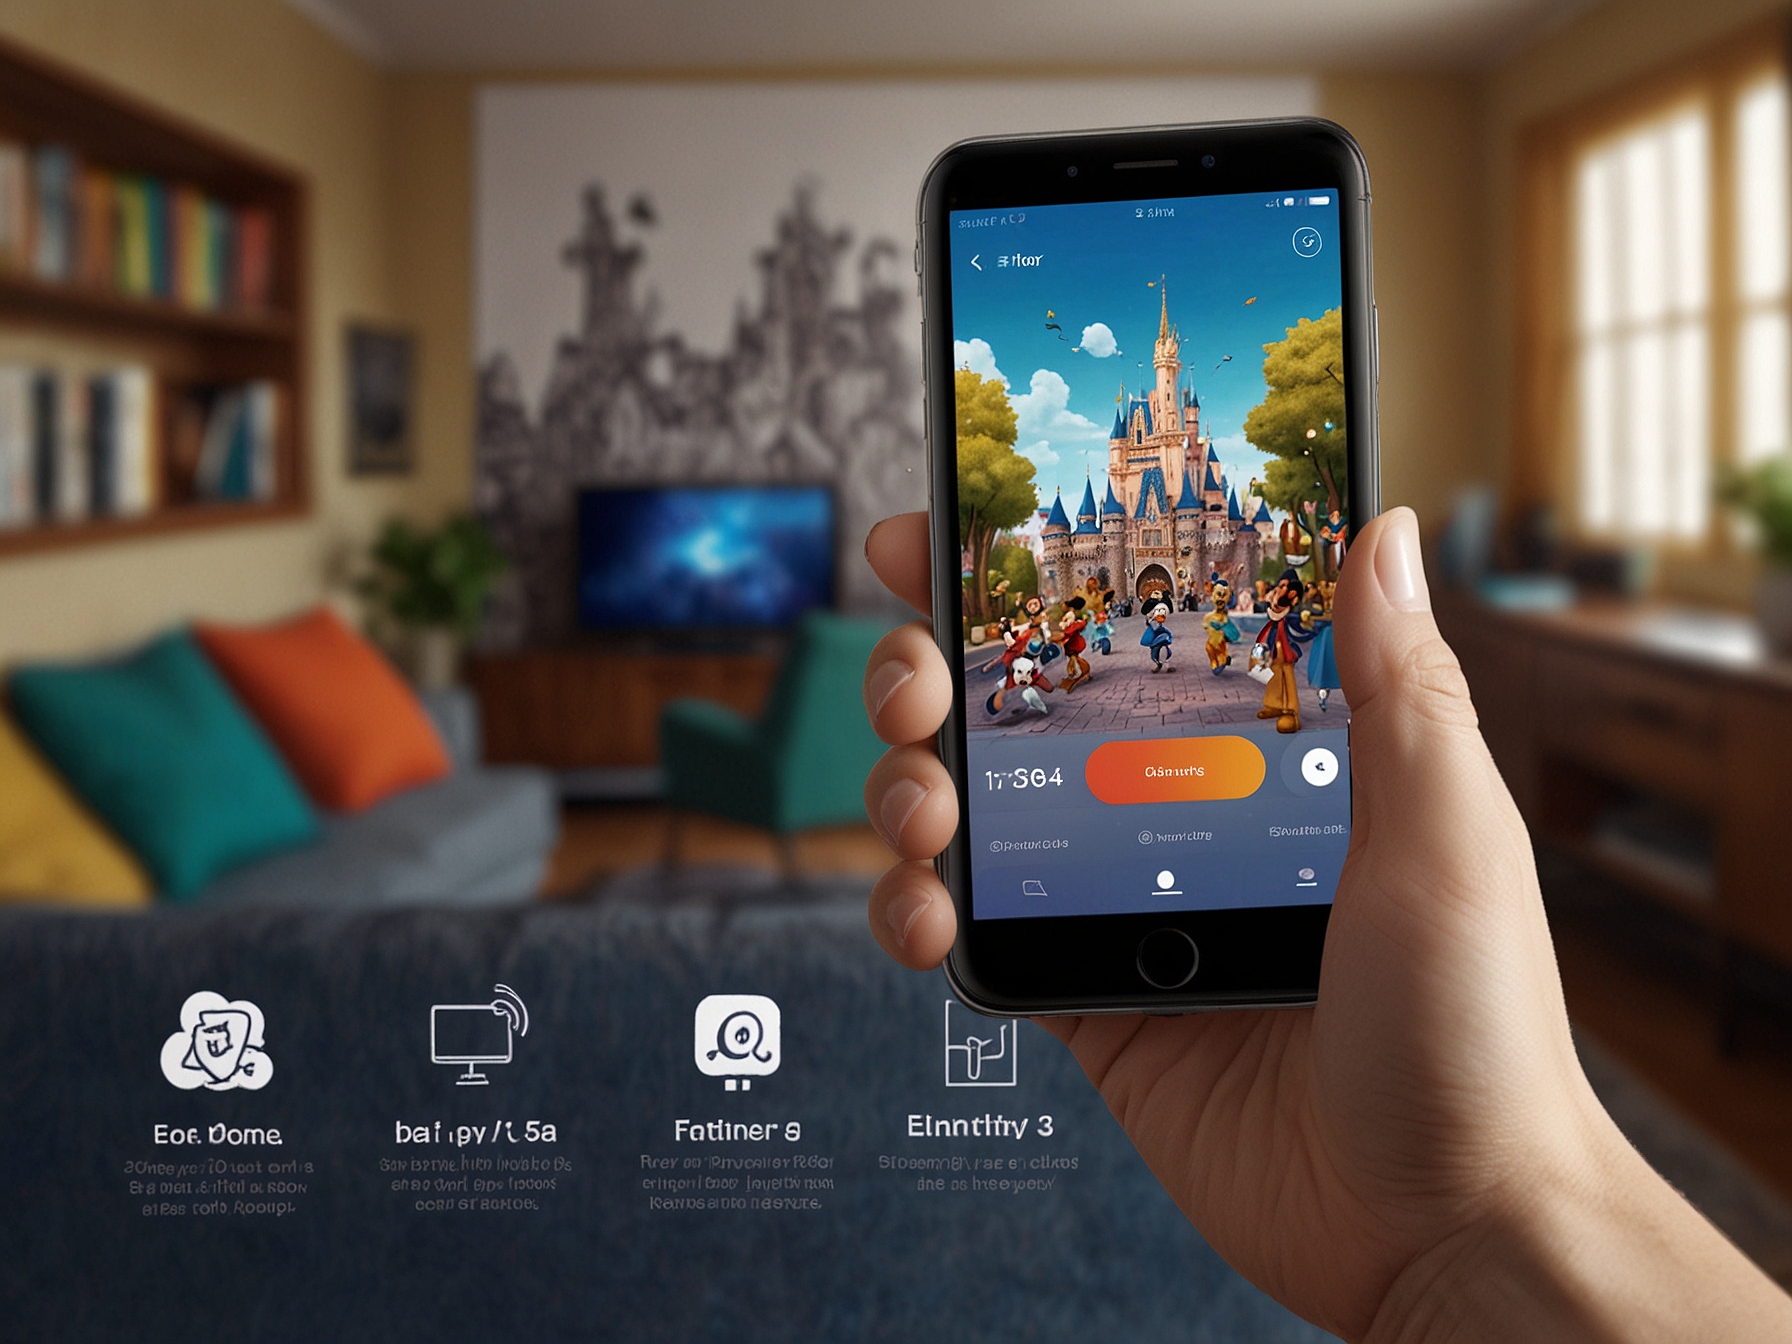 Visual guide showing steps to obtain Disney+ for free, featuring a smartphone with telecom provider offers, a student discount card, and reward app icons to represent different methods.